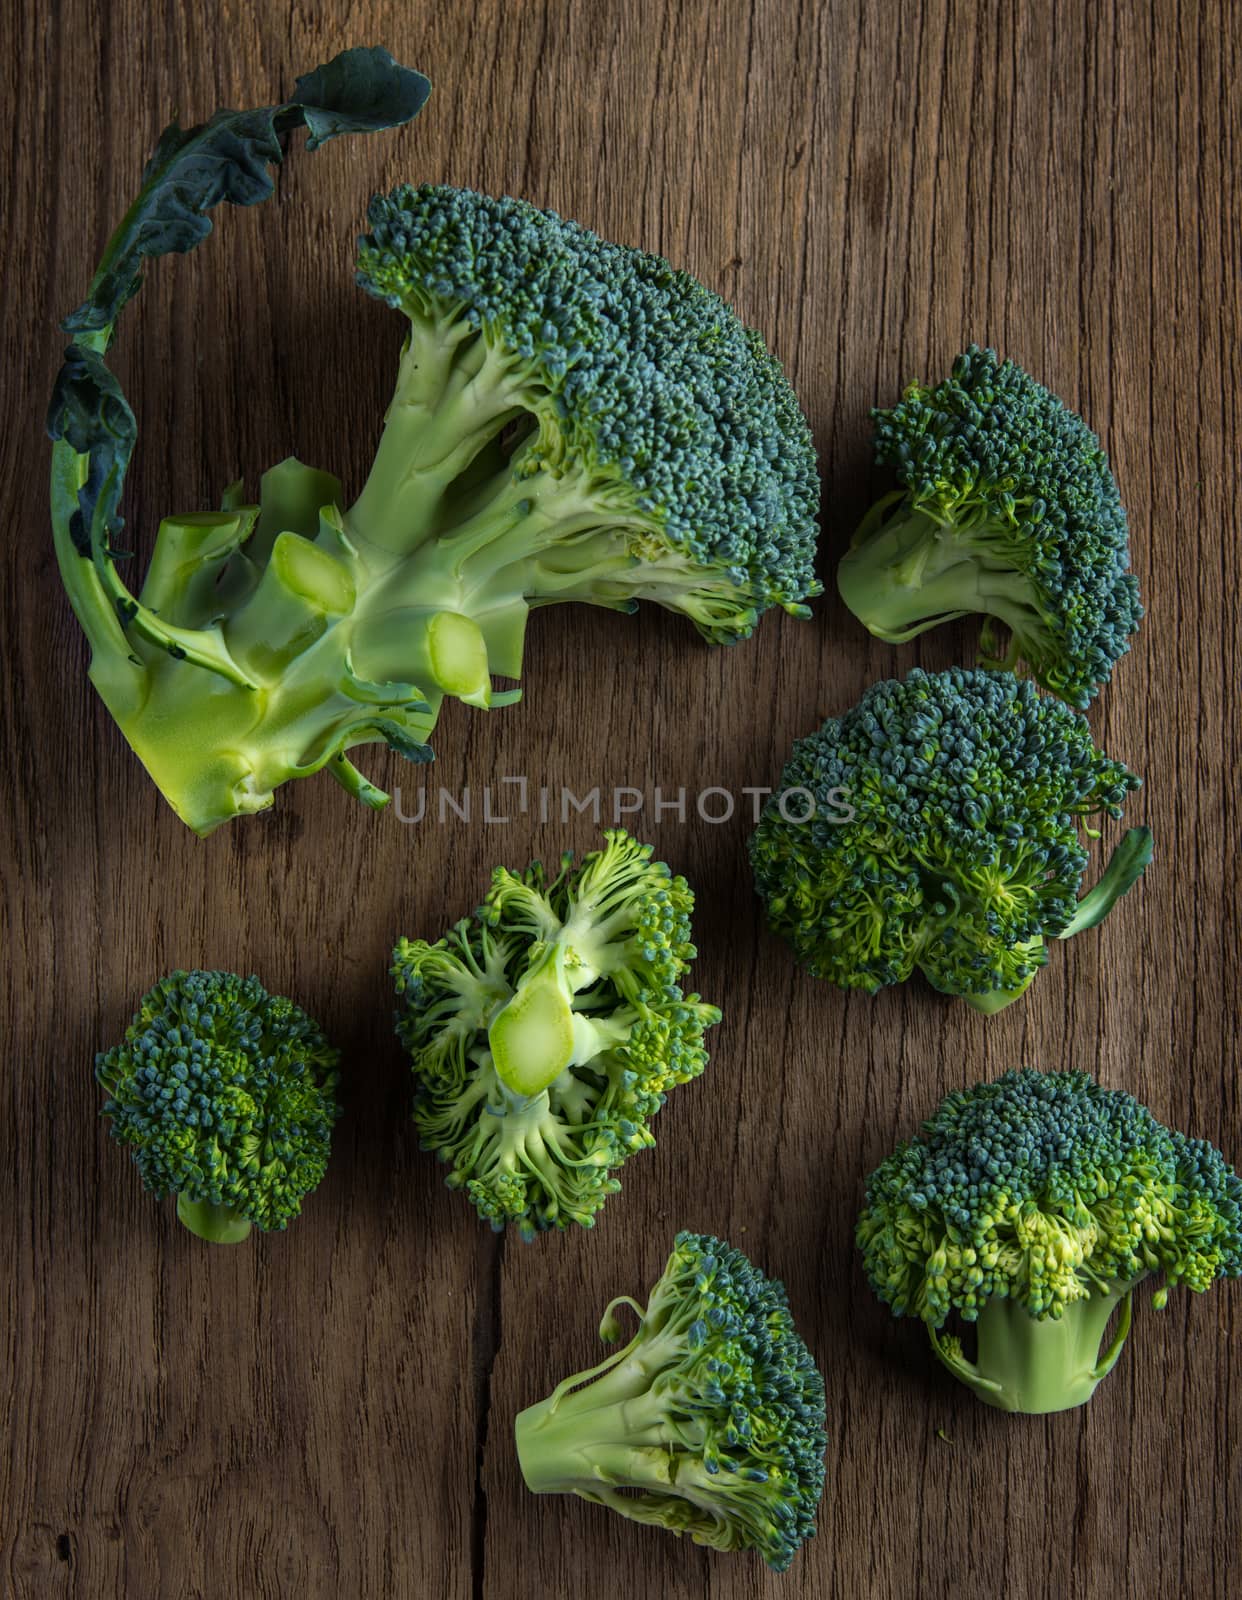 Broccoli on old wooden by sommai